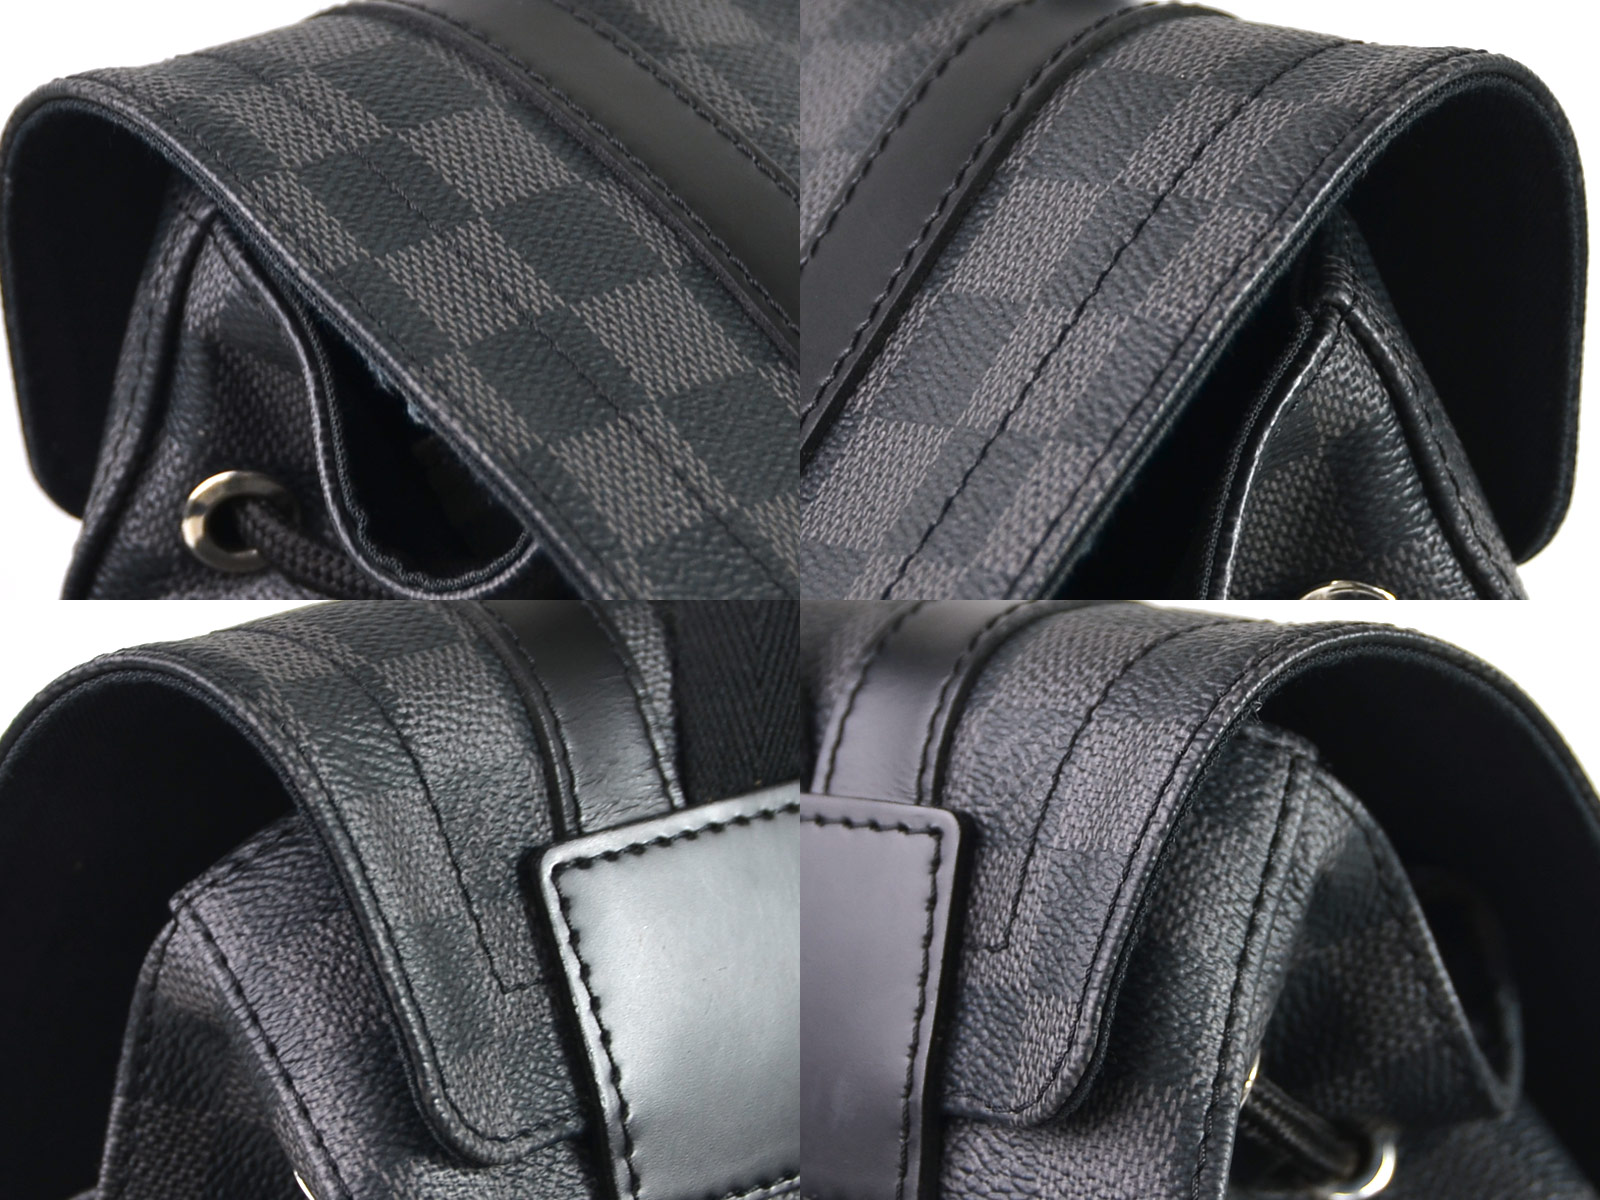 Auth Louis Vuitton Damier Graphite Christopher PM Backpack N41379 - 98336a | eBay